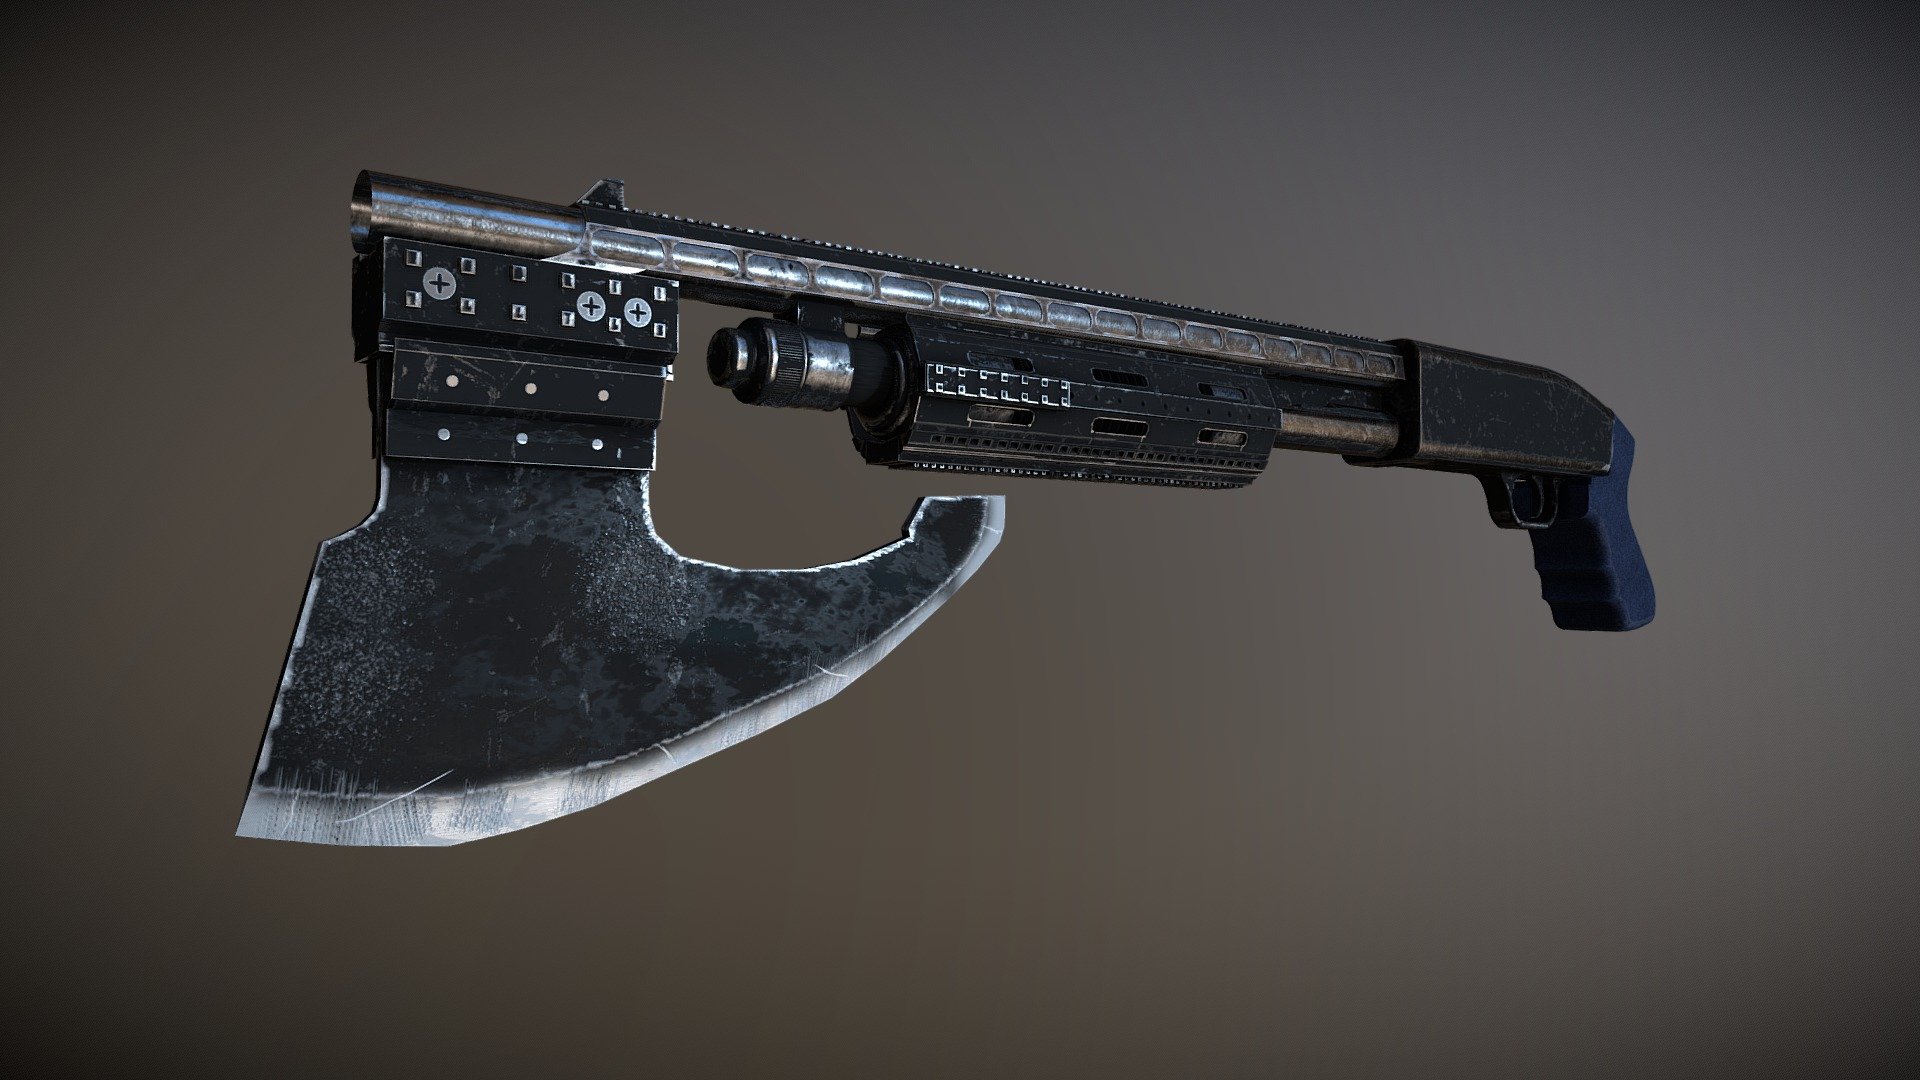 The Shotgun-Axe is a weapon crafted by Alphonso Mackenzie to be used as both a firearm and a melee weapon. He completed it in time to fight Hive's Primitives on the Zephyr One, which is capable of firing normal and I.C.E.R. shells.

Agents of S.H.I.E.L.D 3d model